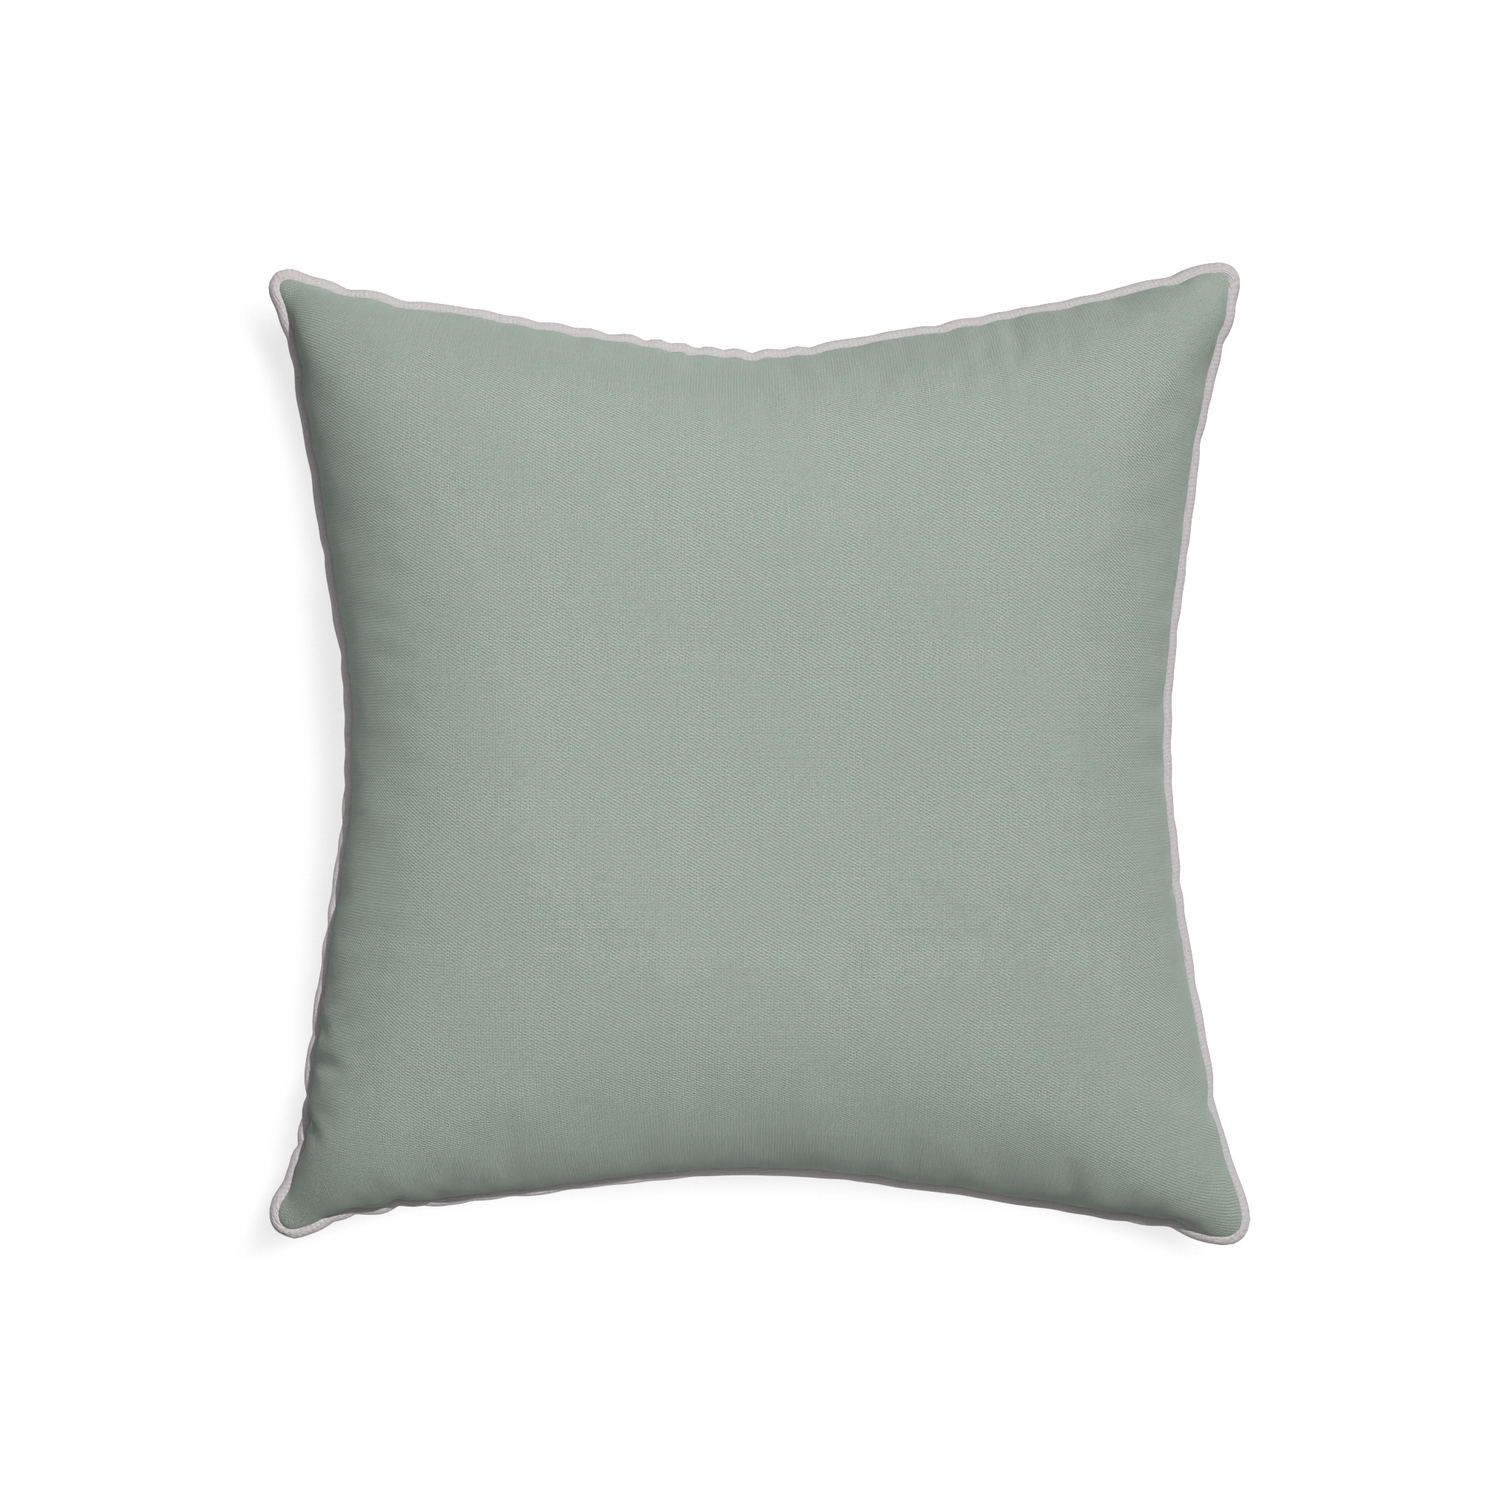 22-square sage custom sage green cottonpillow with pebble piping on white background